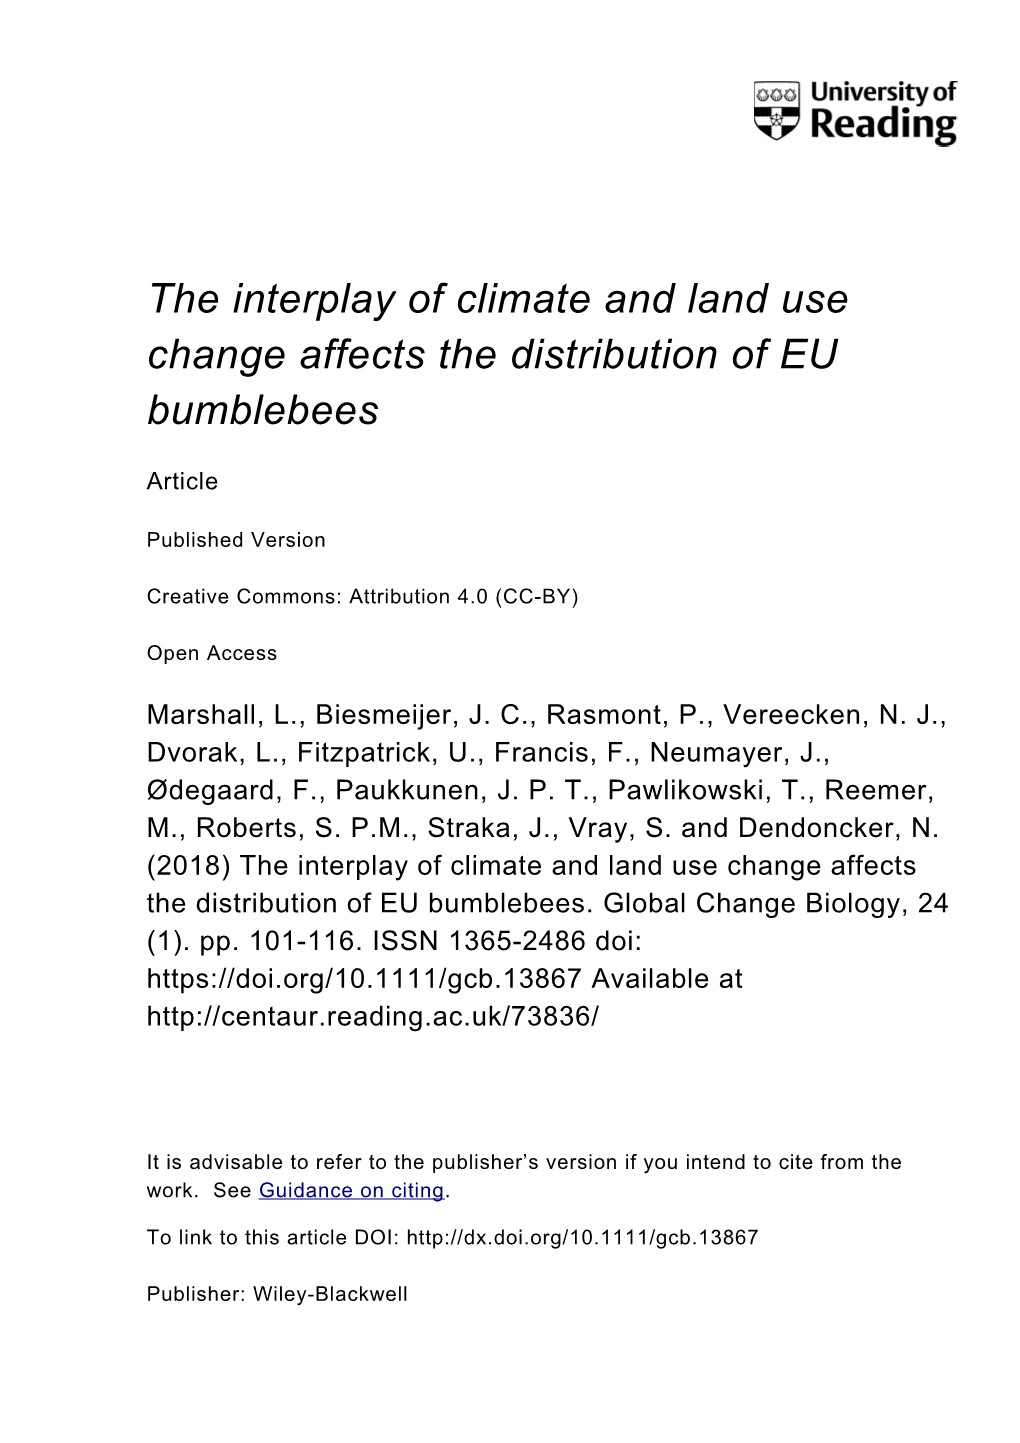 The Interplay of Climate and Land Use Change Affects the Distribution of EU Bumblebees